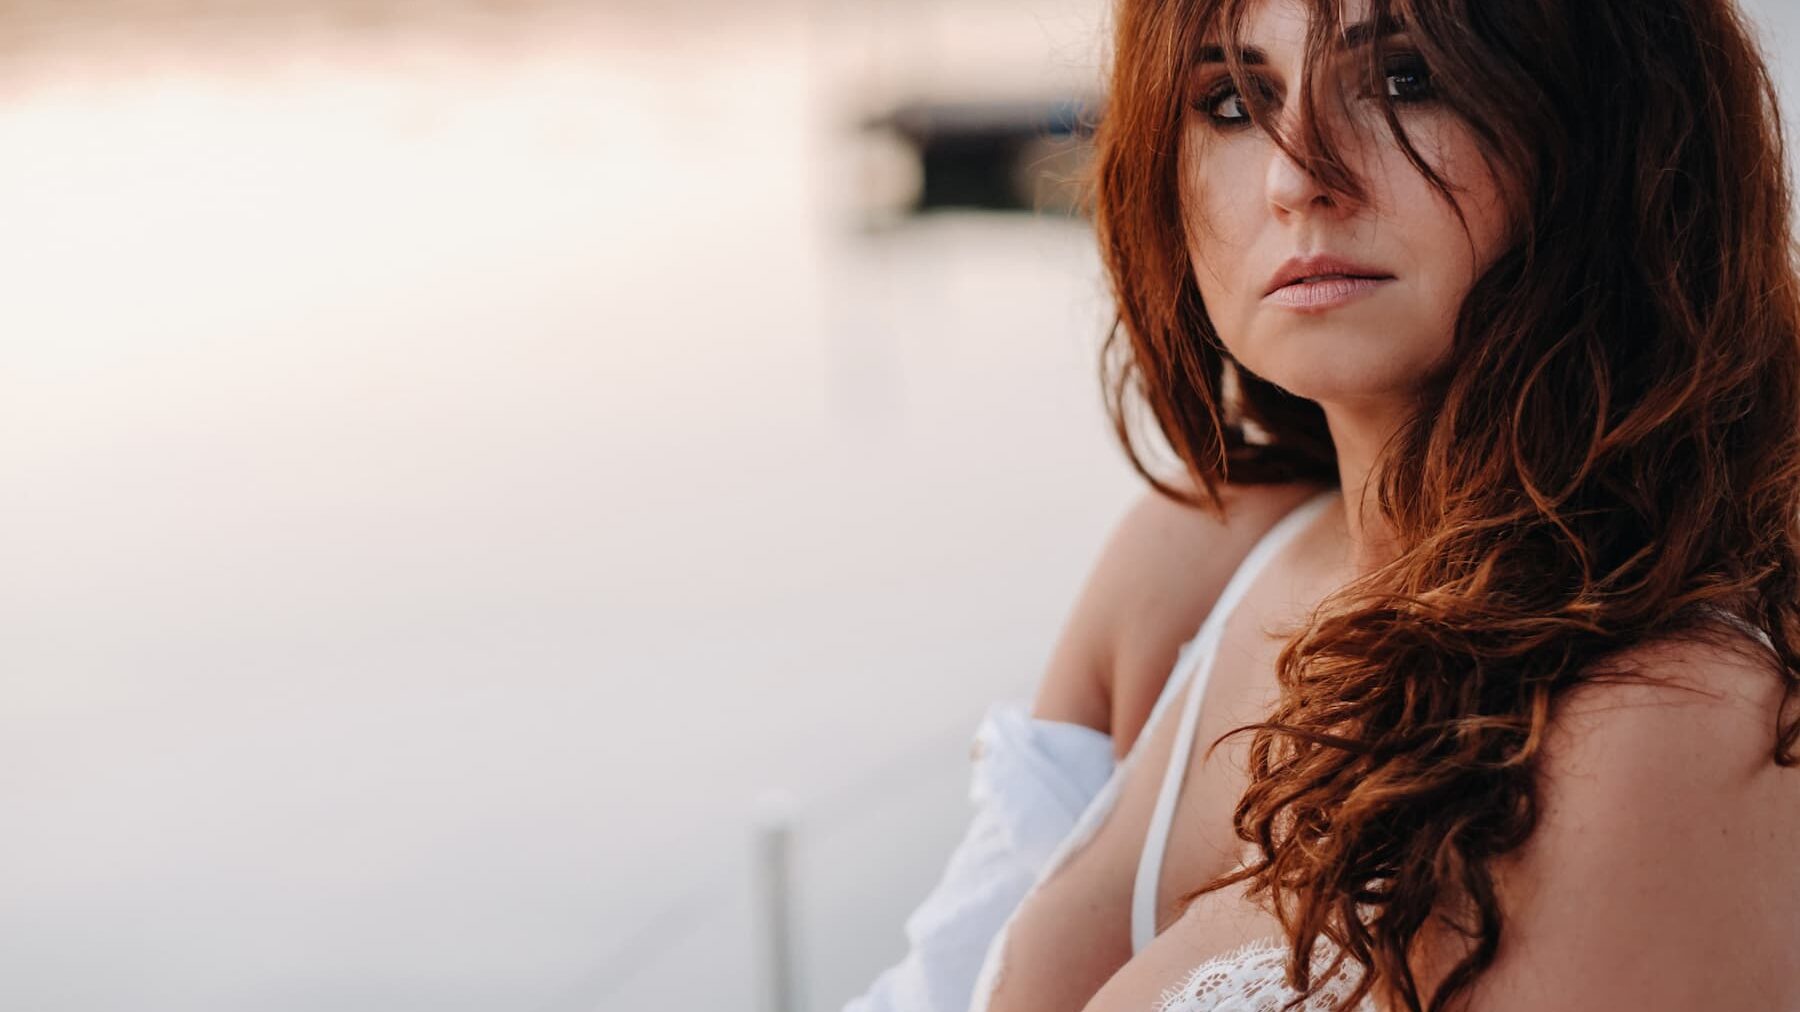 Sexy woman in a white shirt enjoys the sunset.